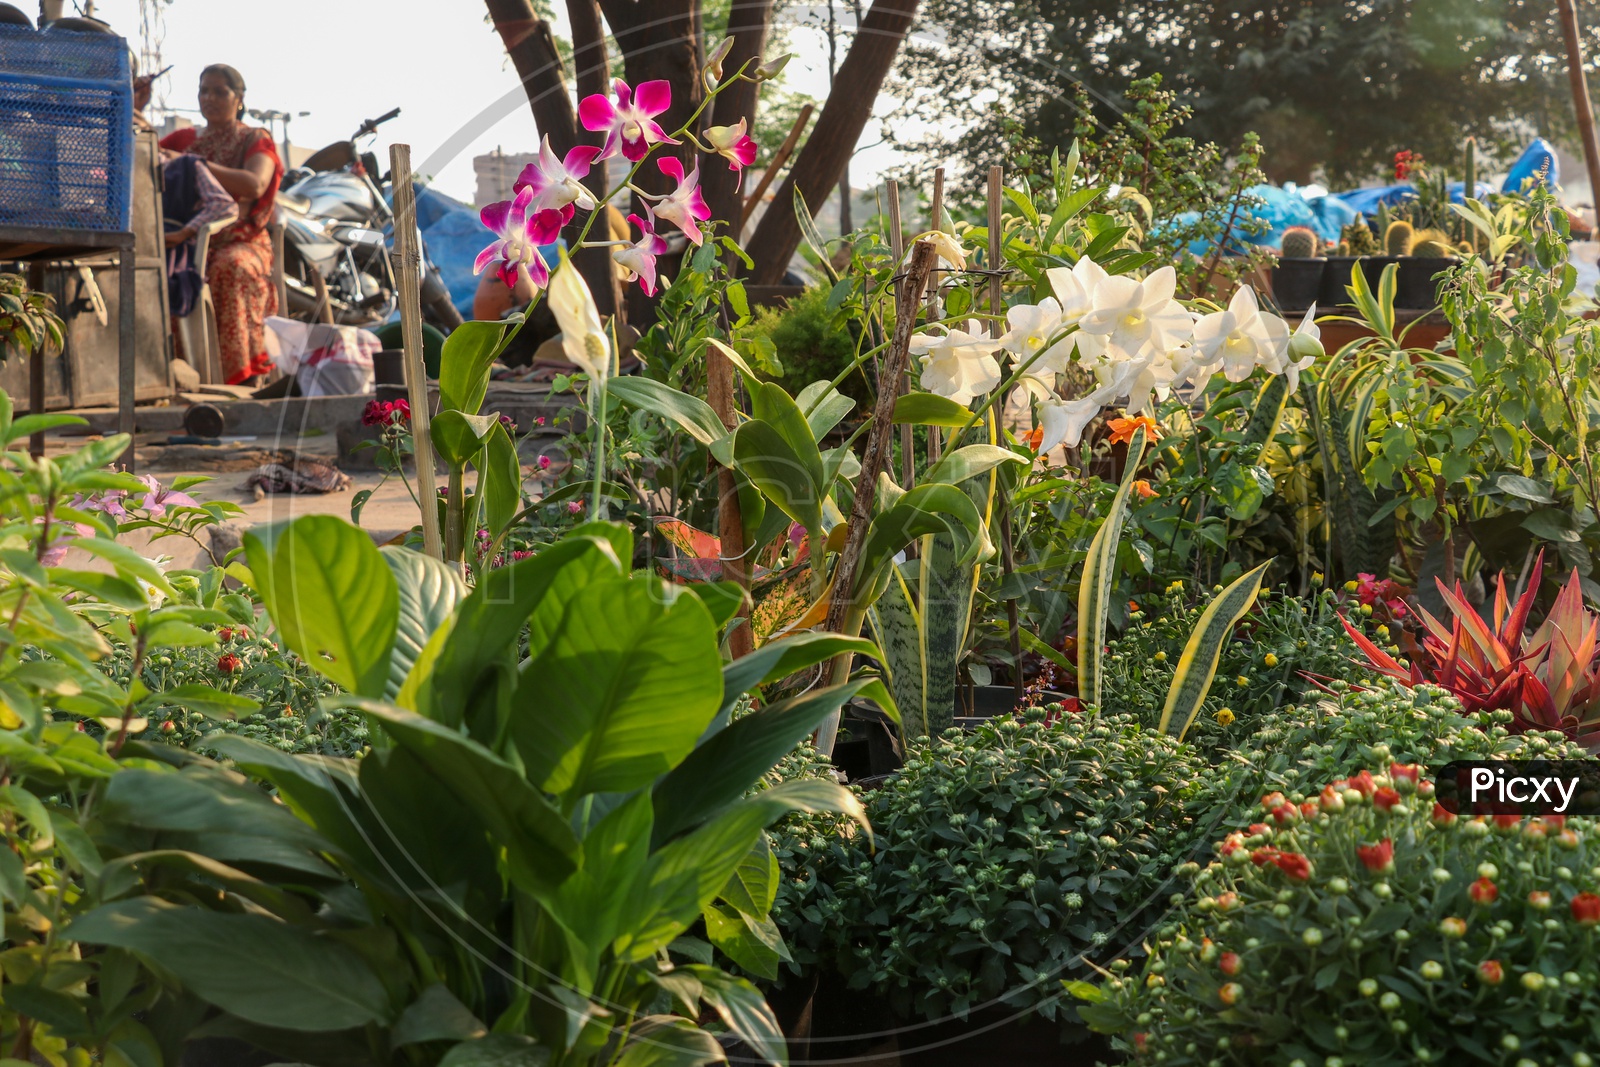 Flower Plants being Selling At a Road Side Vendor stall